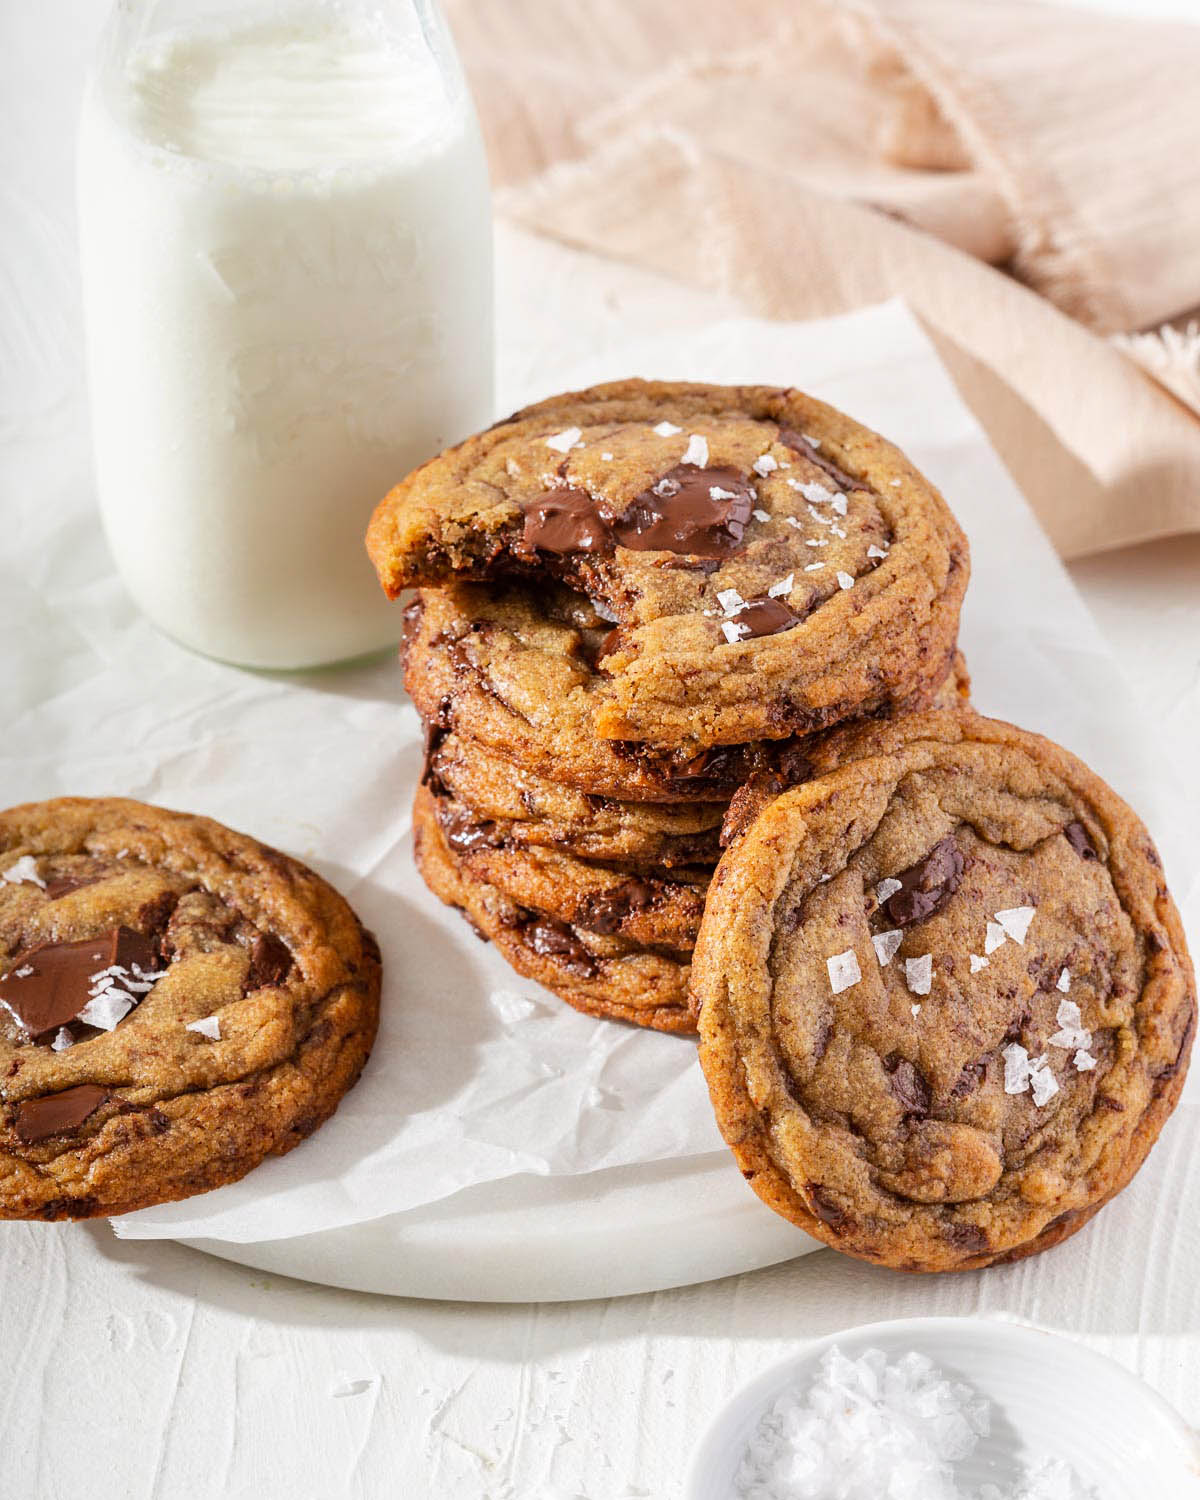 Stacks of chocolate chip cookies with a glass of milk on a tray